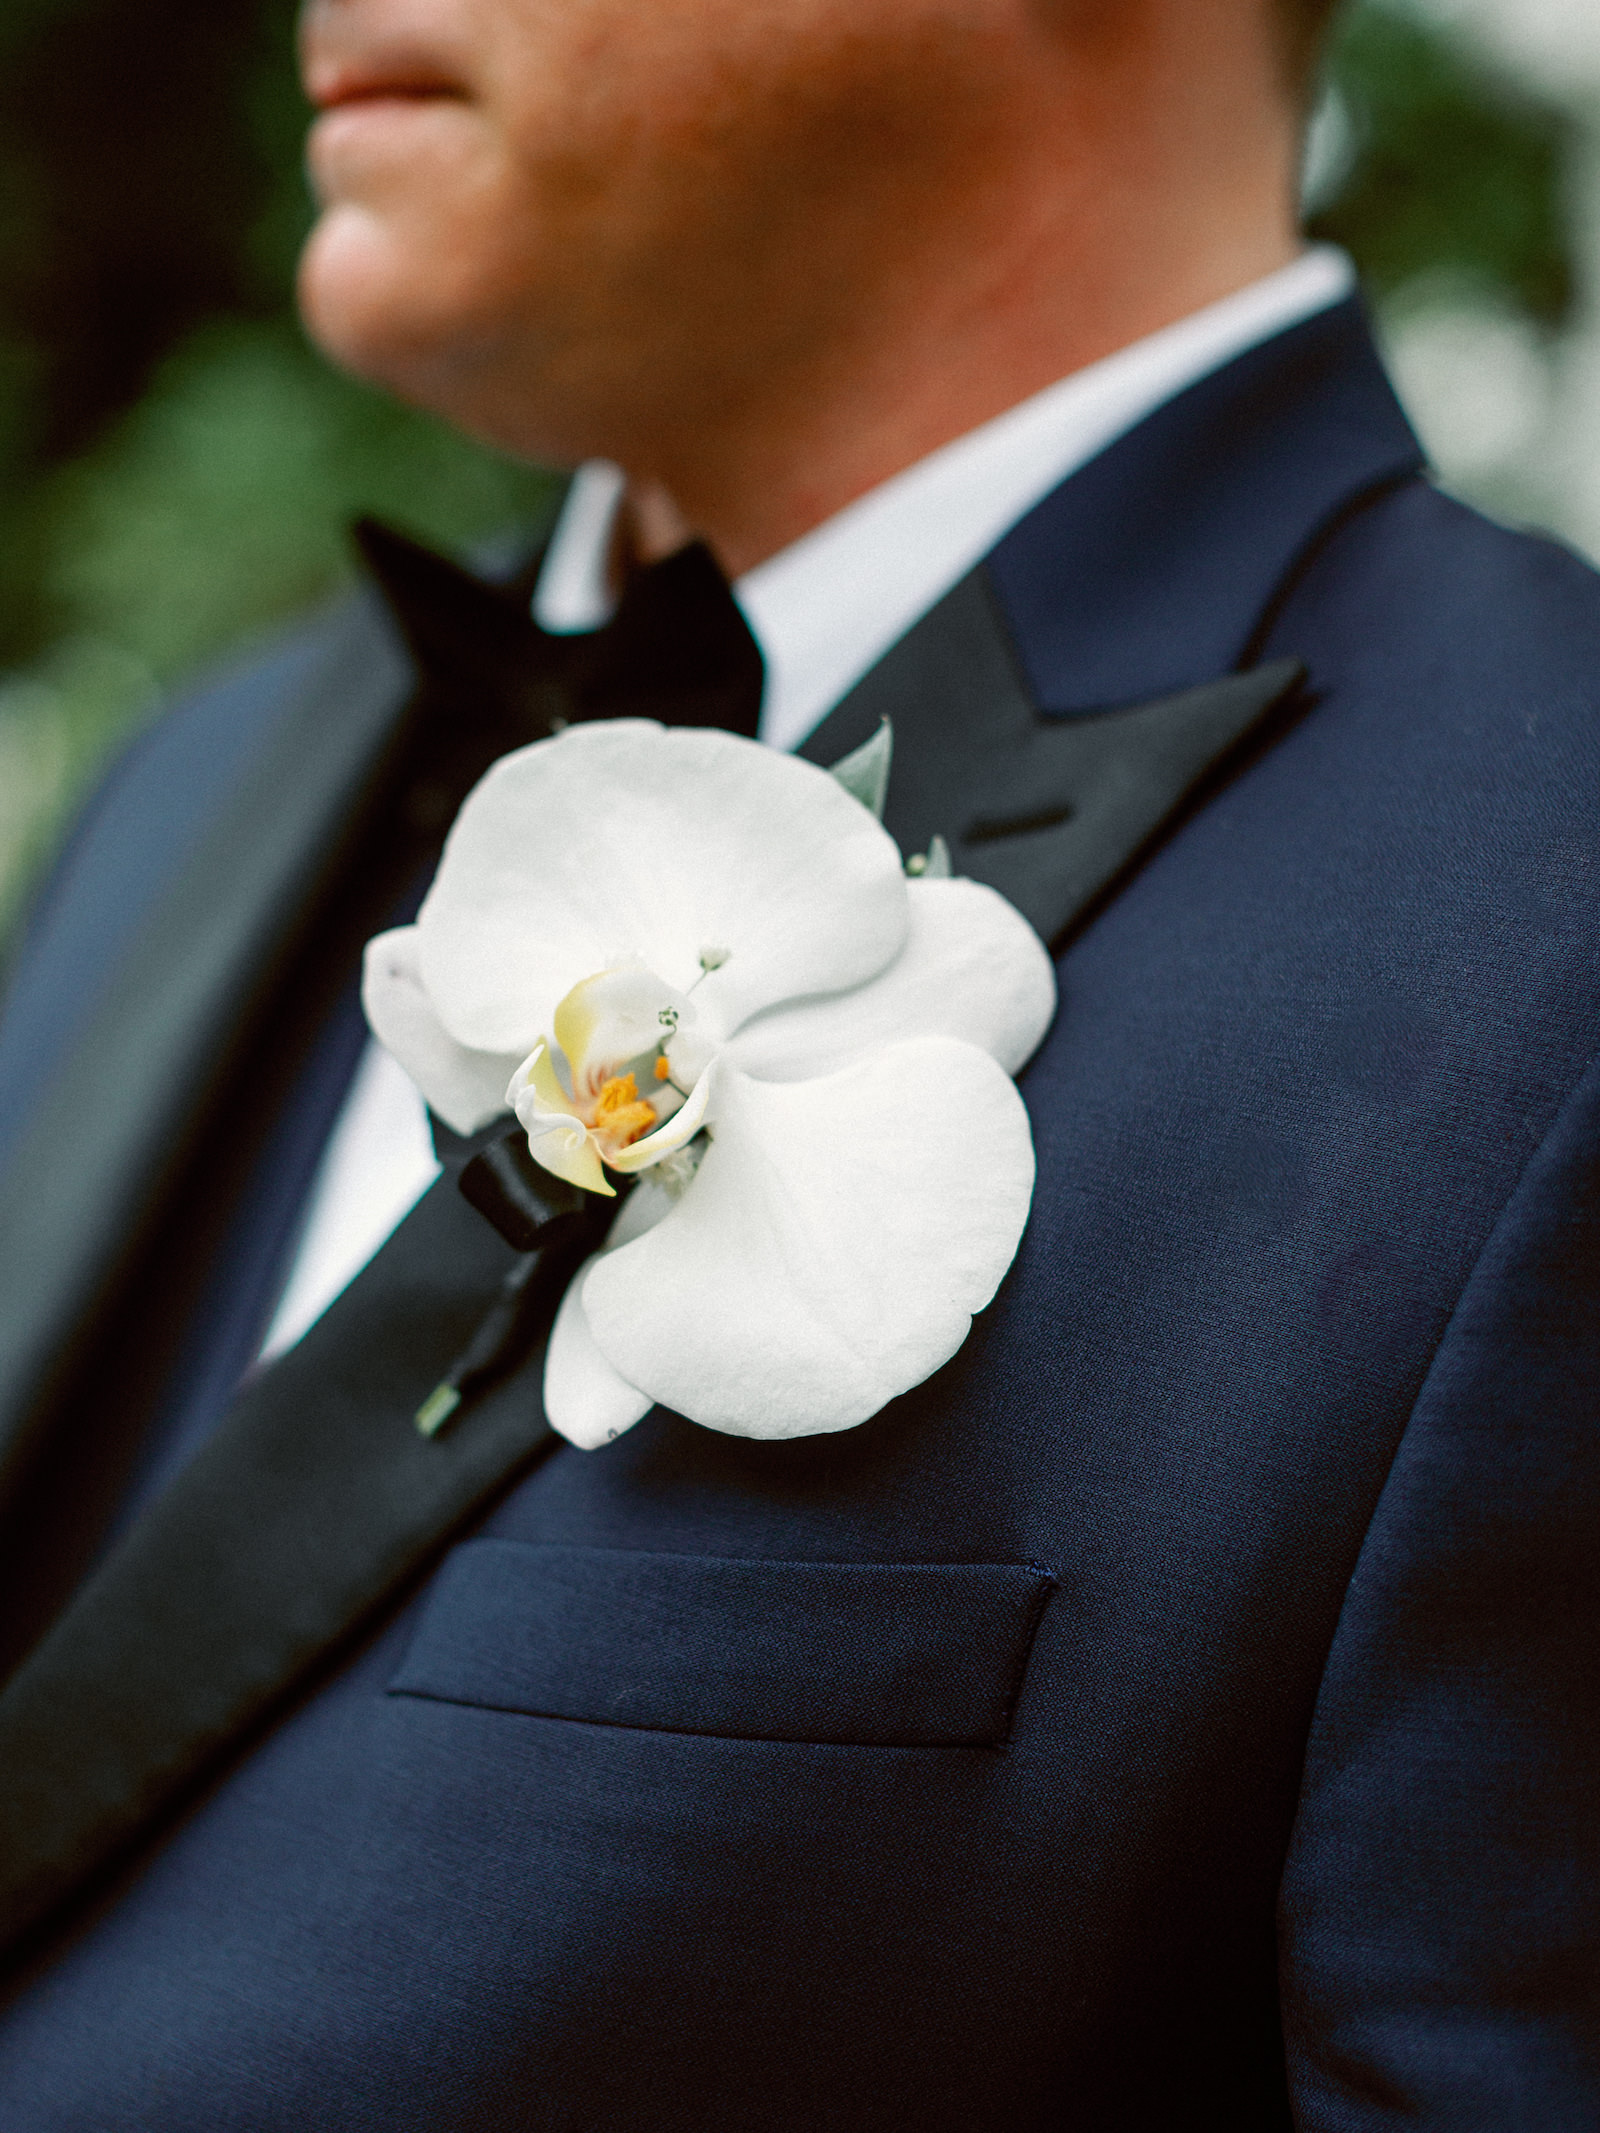 Fairytale Red and Pink Wedding, Groom Wearing Navy Blue with Black Collar Tuxedo, White Orchid Boutonniere | Tampa Bay Wedding Photographer Dewitt for Love Photography, Wedding Florist Lemon Drops